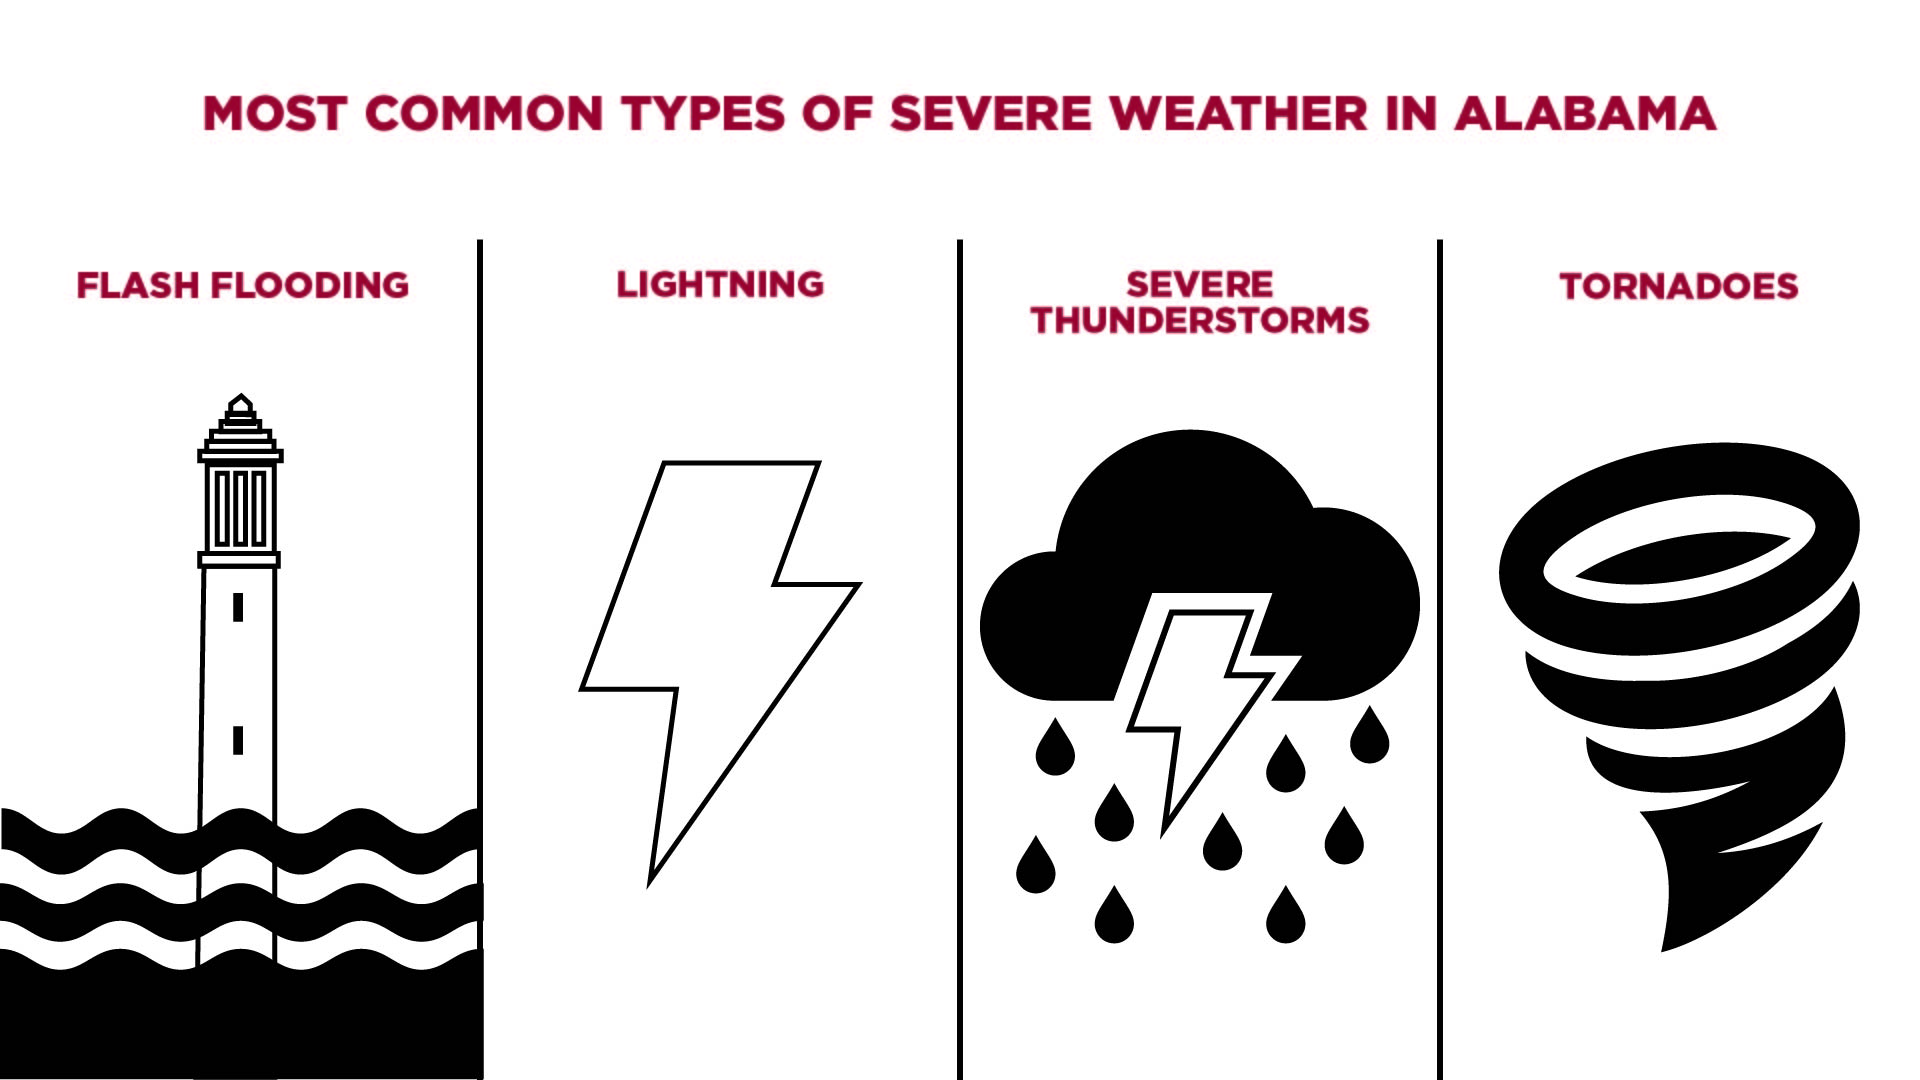 a graphic showing the most common severe weather dangers in Alabama: flash flooding, lighting, severe thunderstorms, tornadoes